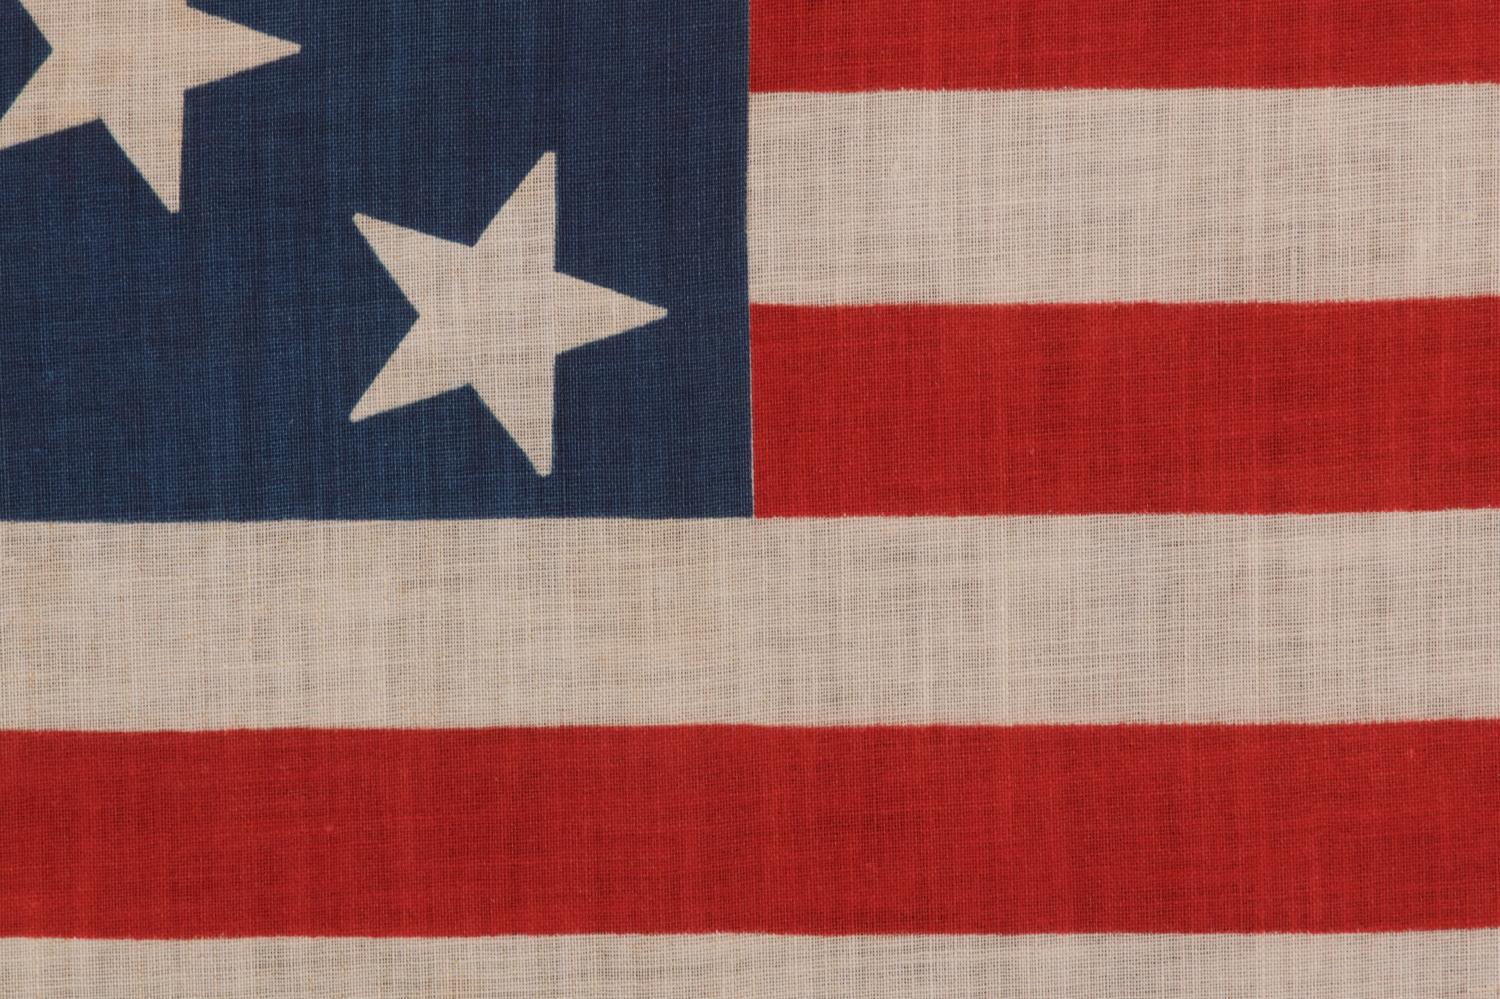 American 13 Star Parade Flag with Stars in a 3-2-3-2-3 Pattern, circa 1876-1898